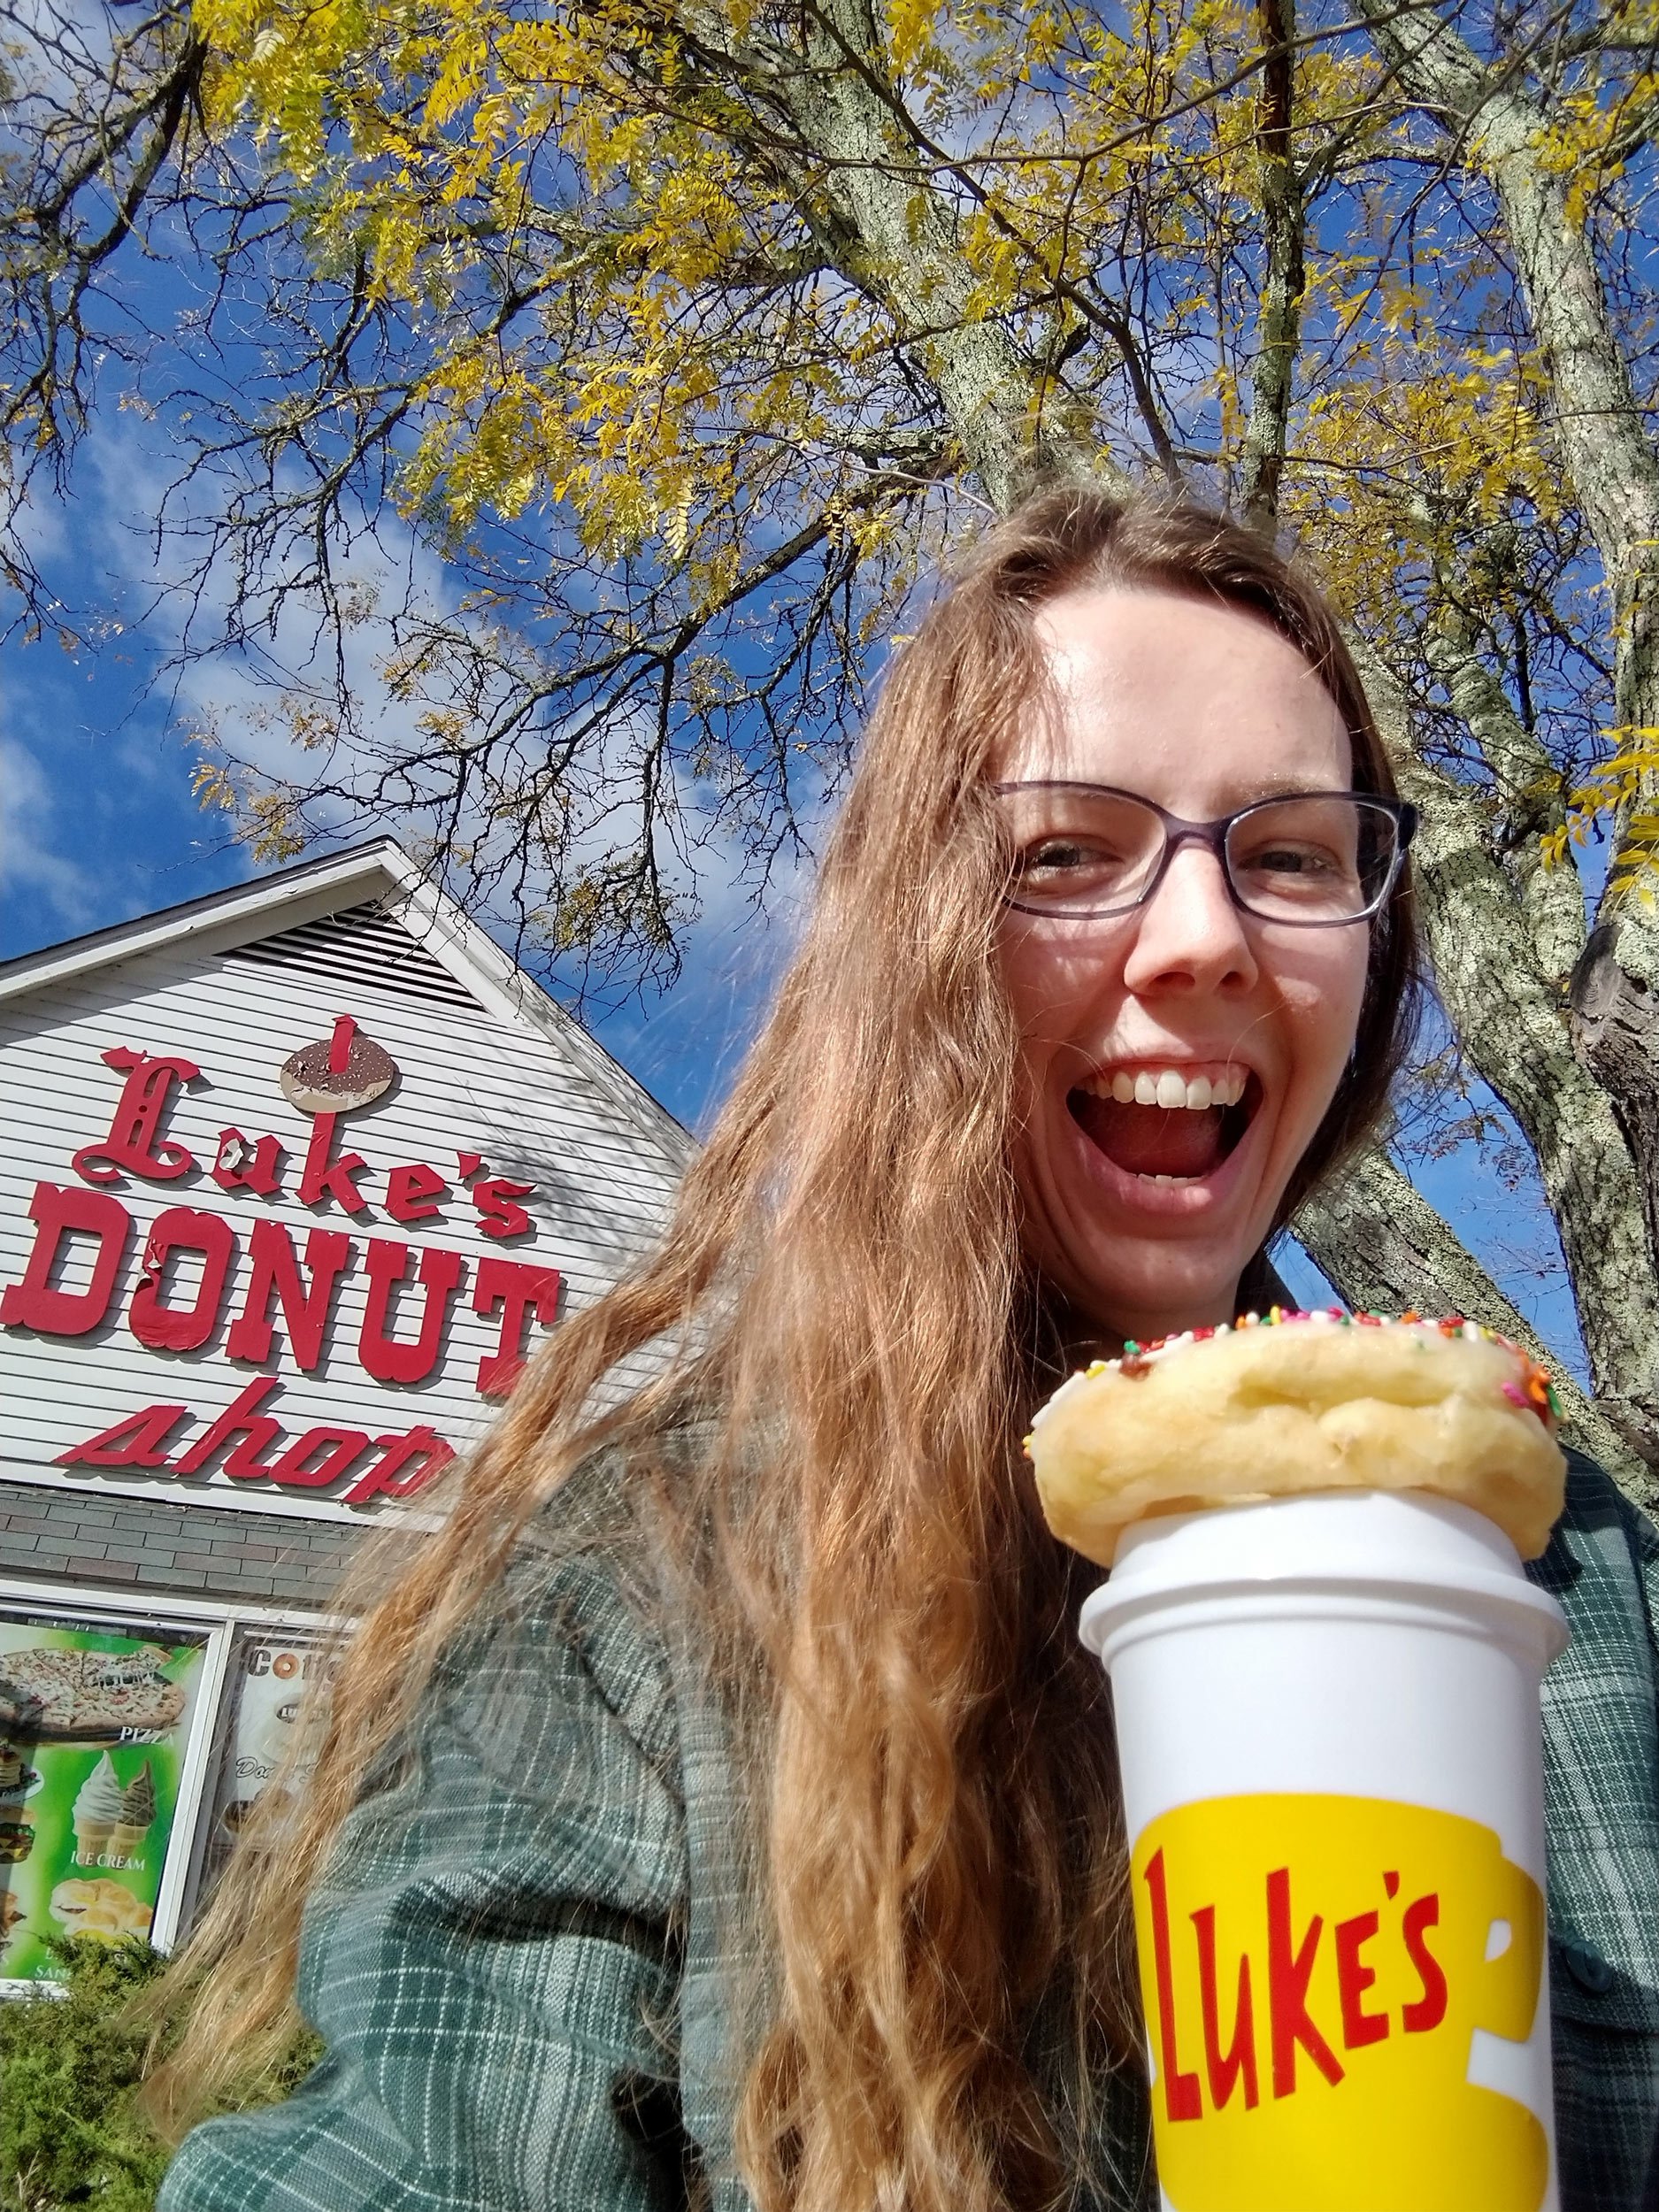 lukes-donut-shop-in-connecticut